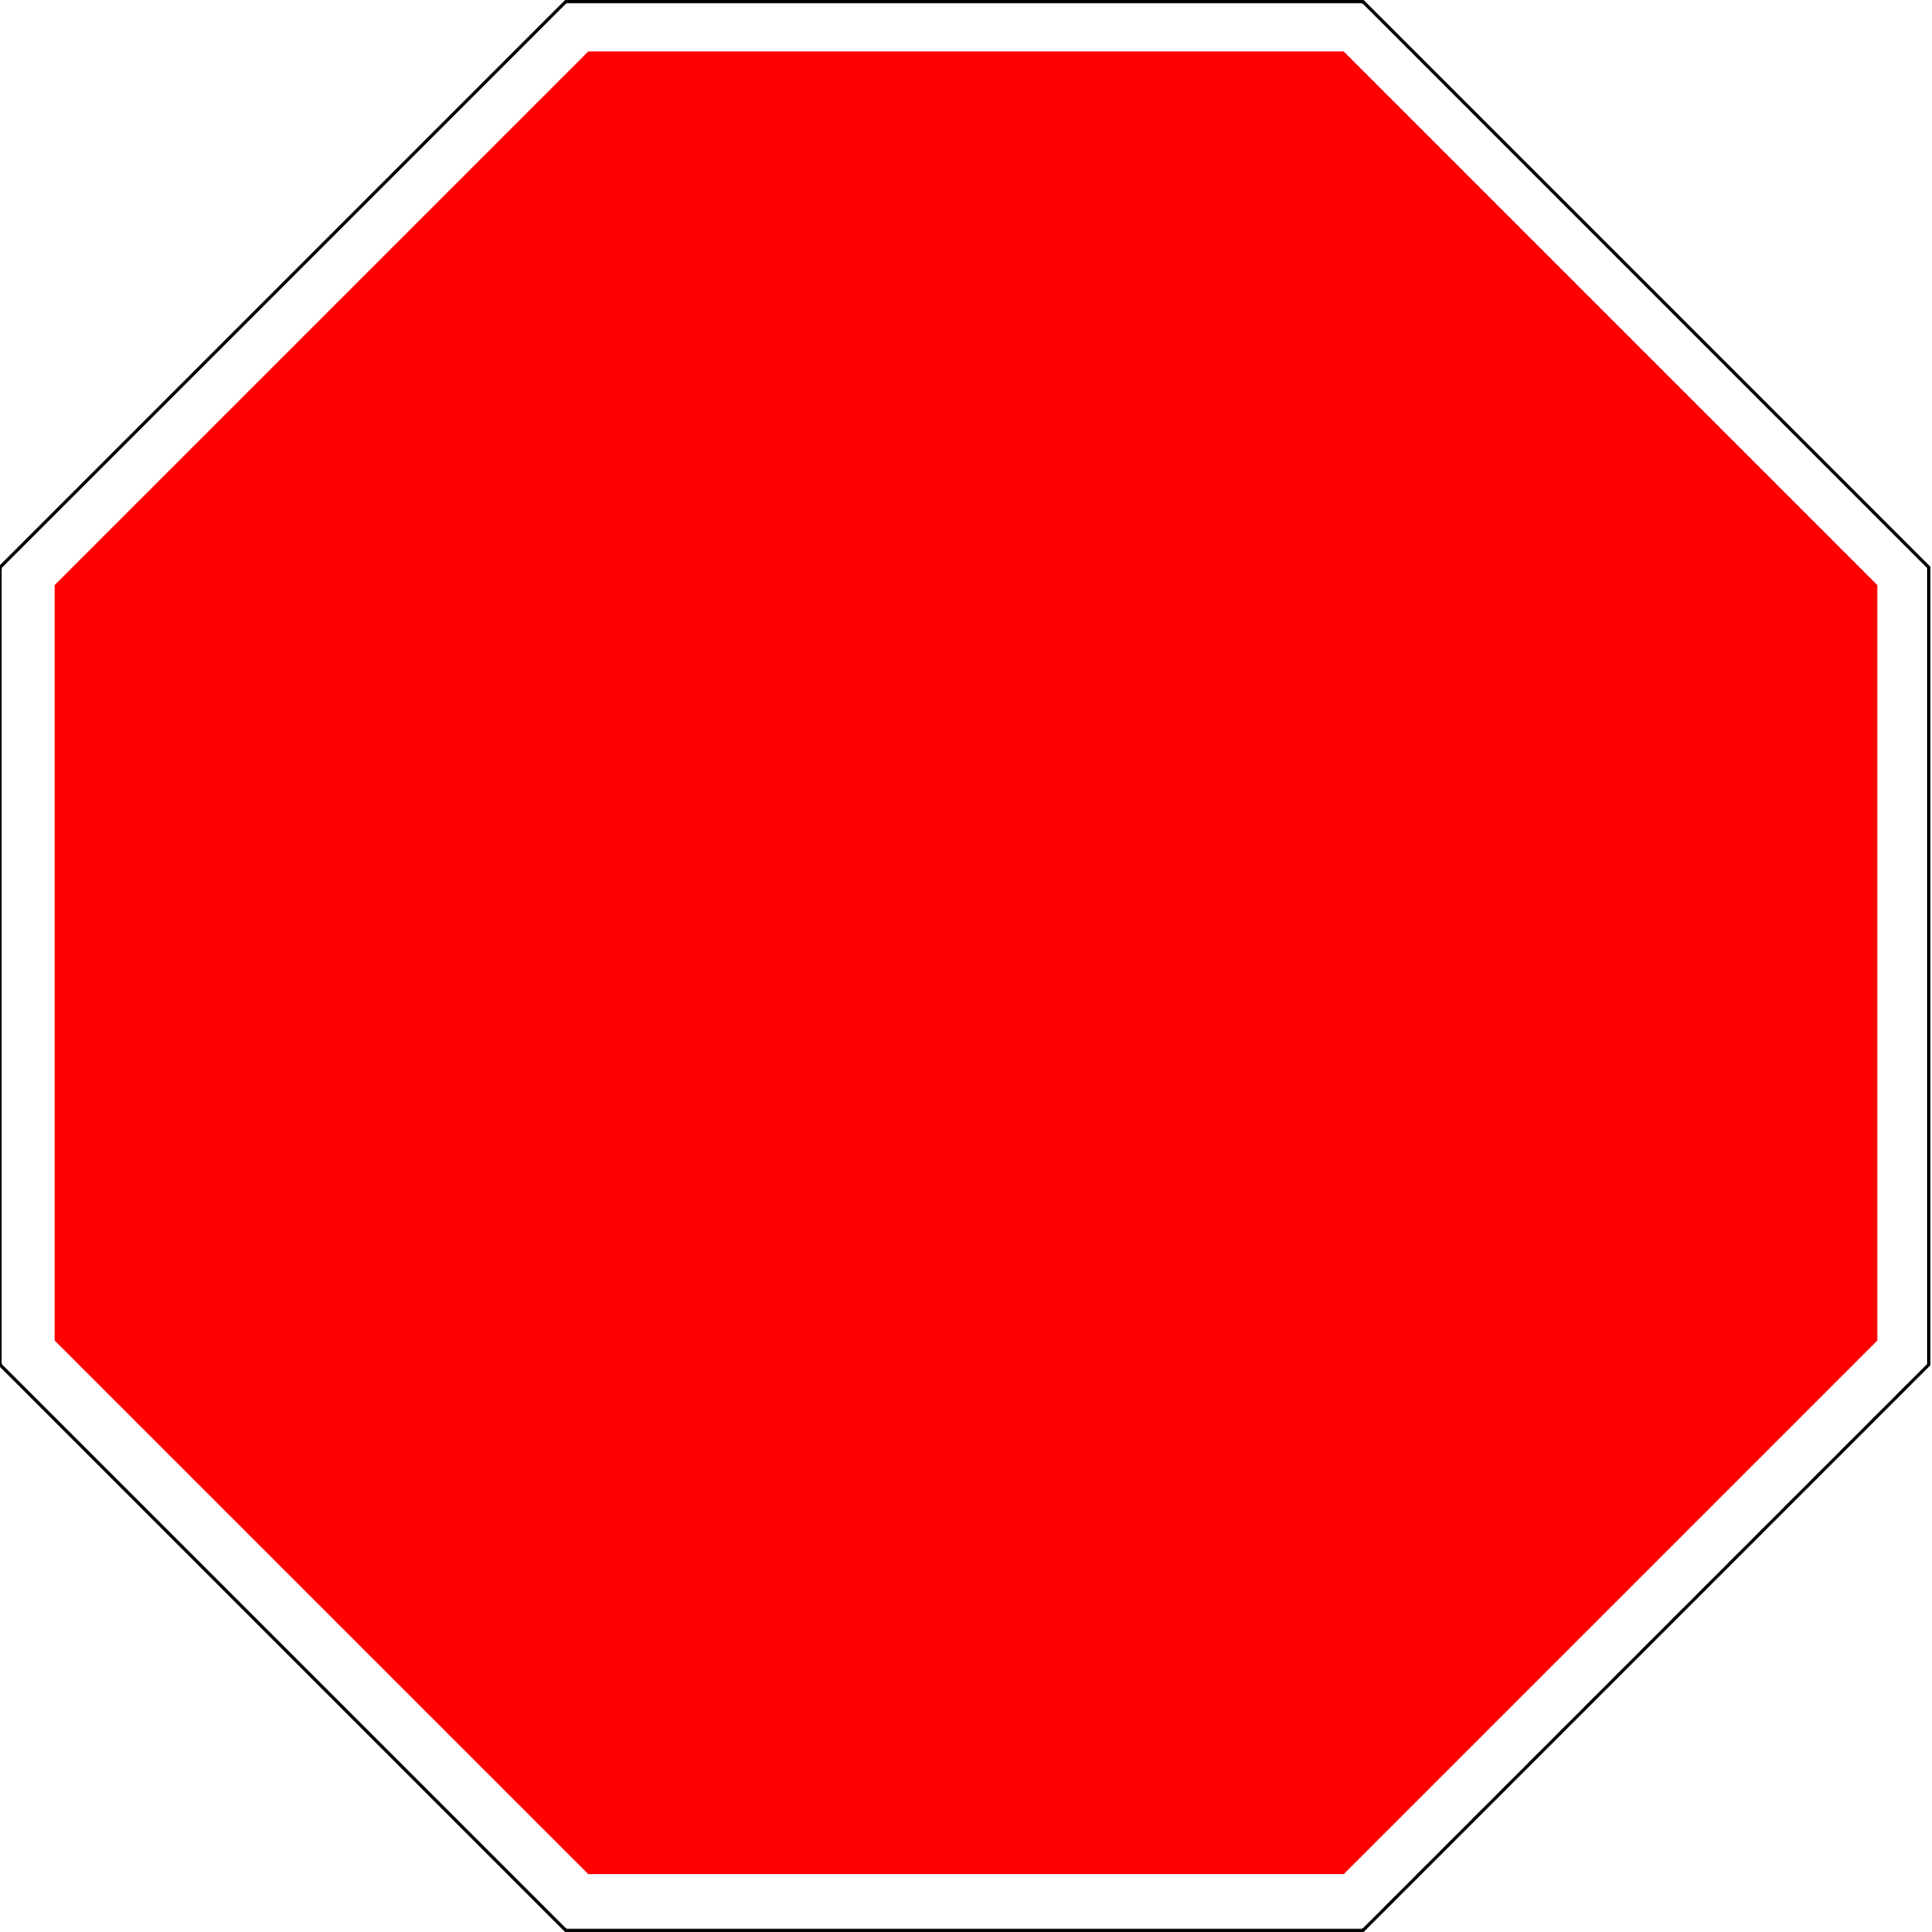 File:Blank stop sign octagon.svg - Wikimedia Commons